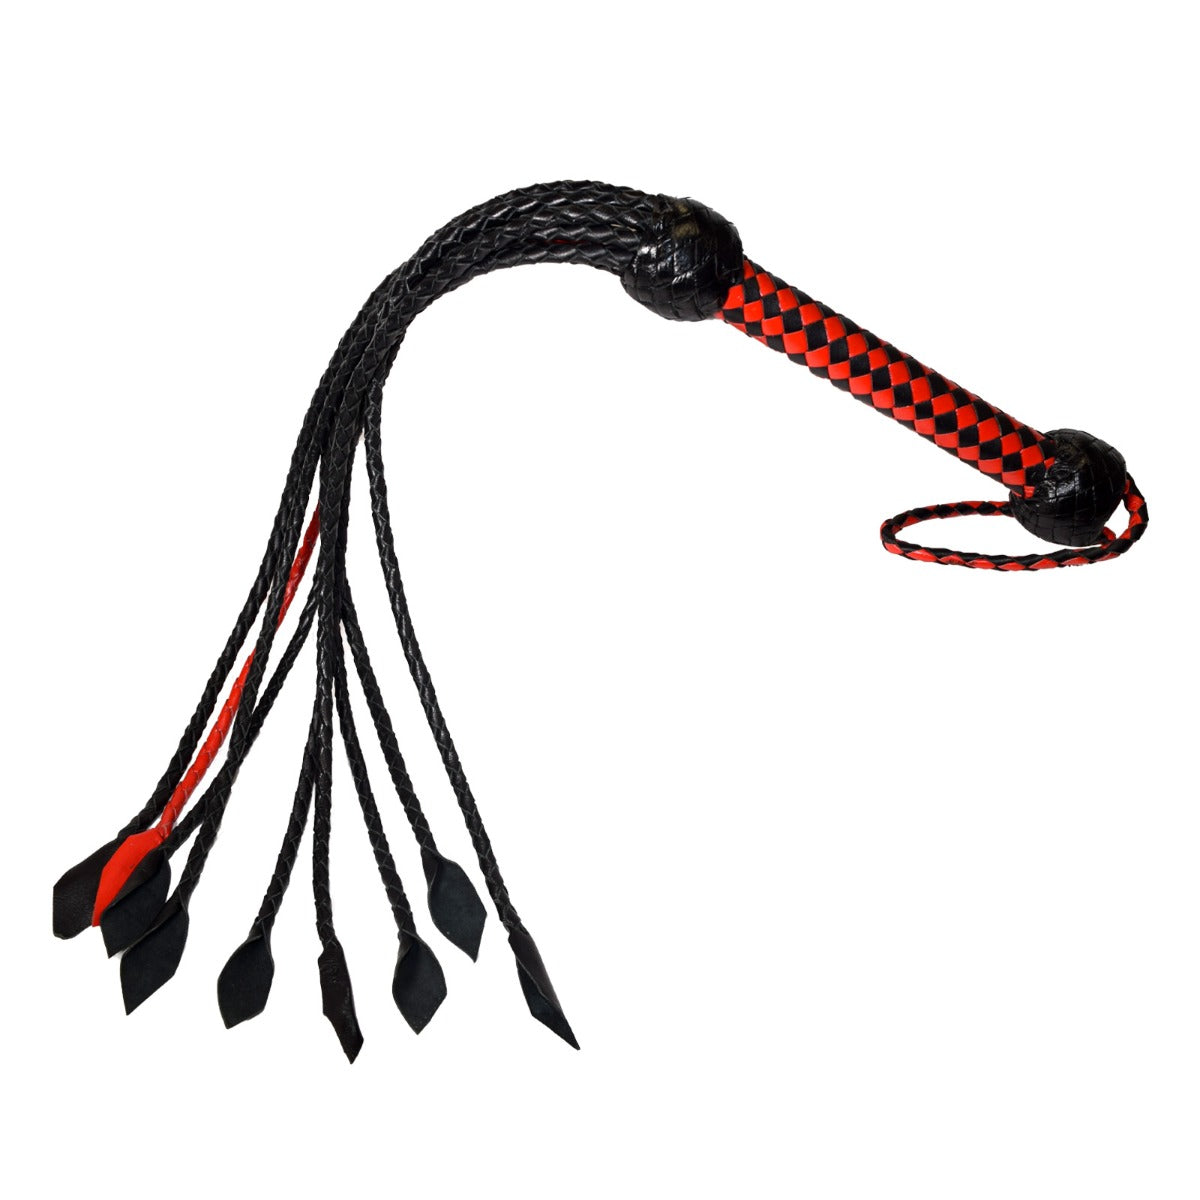 PROWLER RED Short Handle Red and Black Flogger